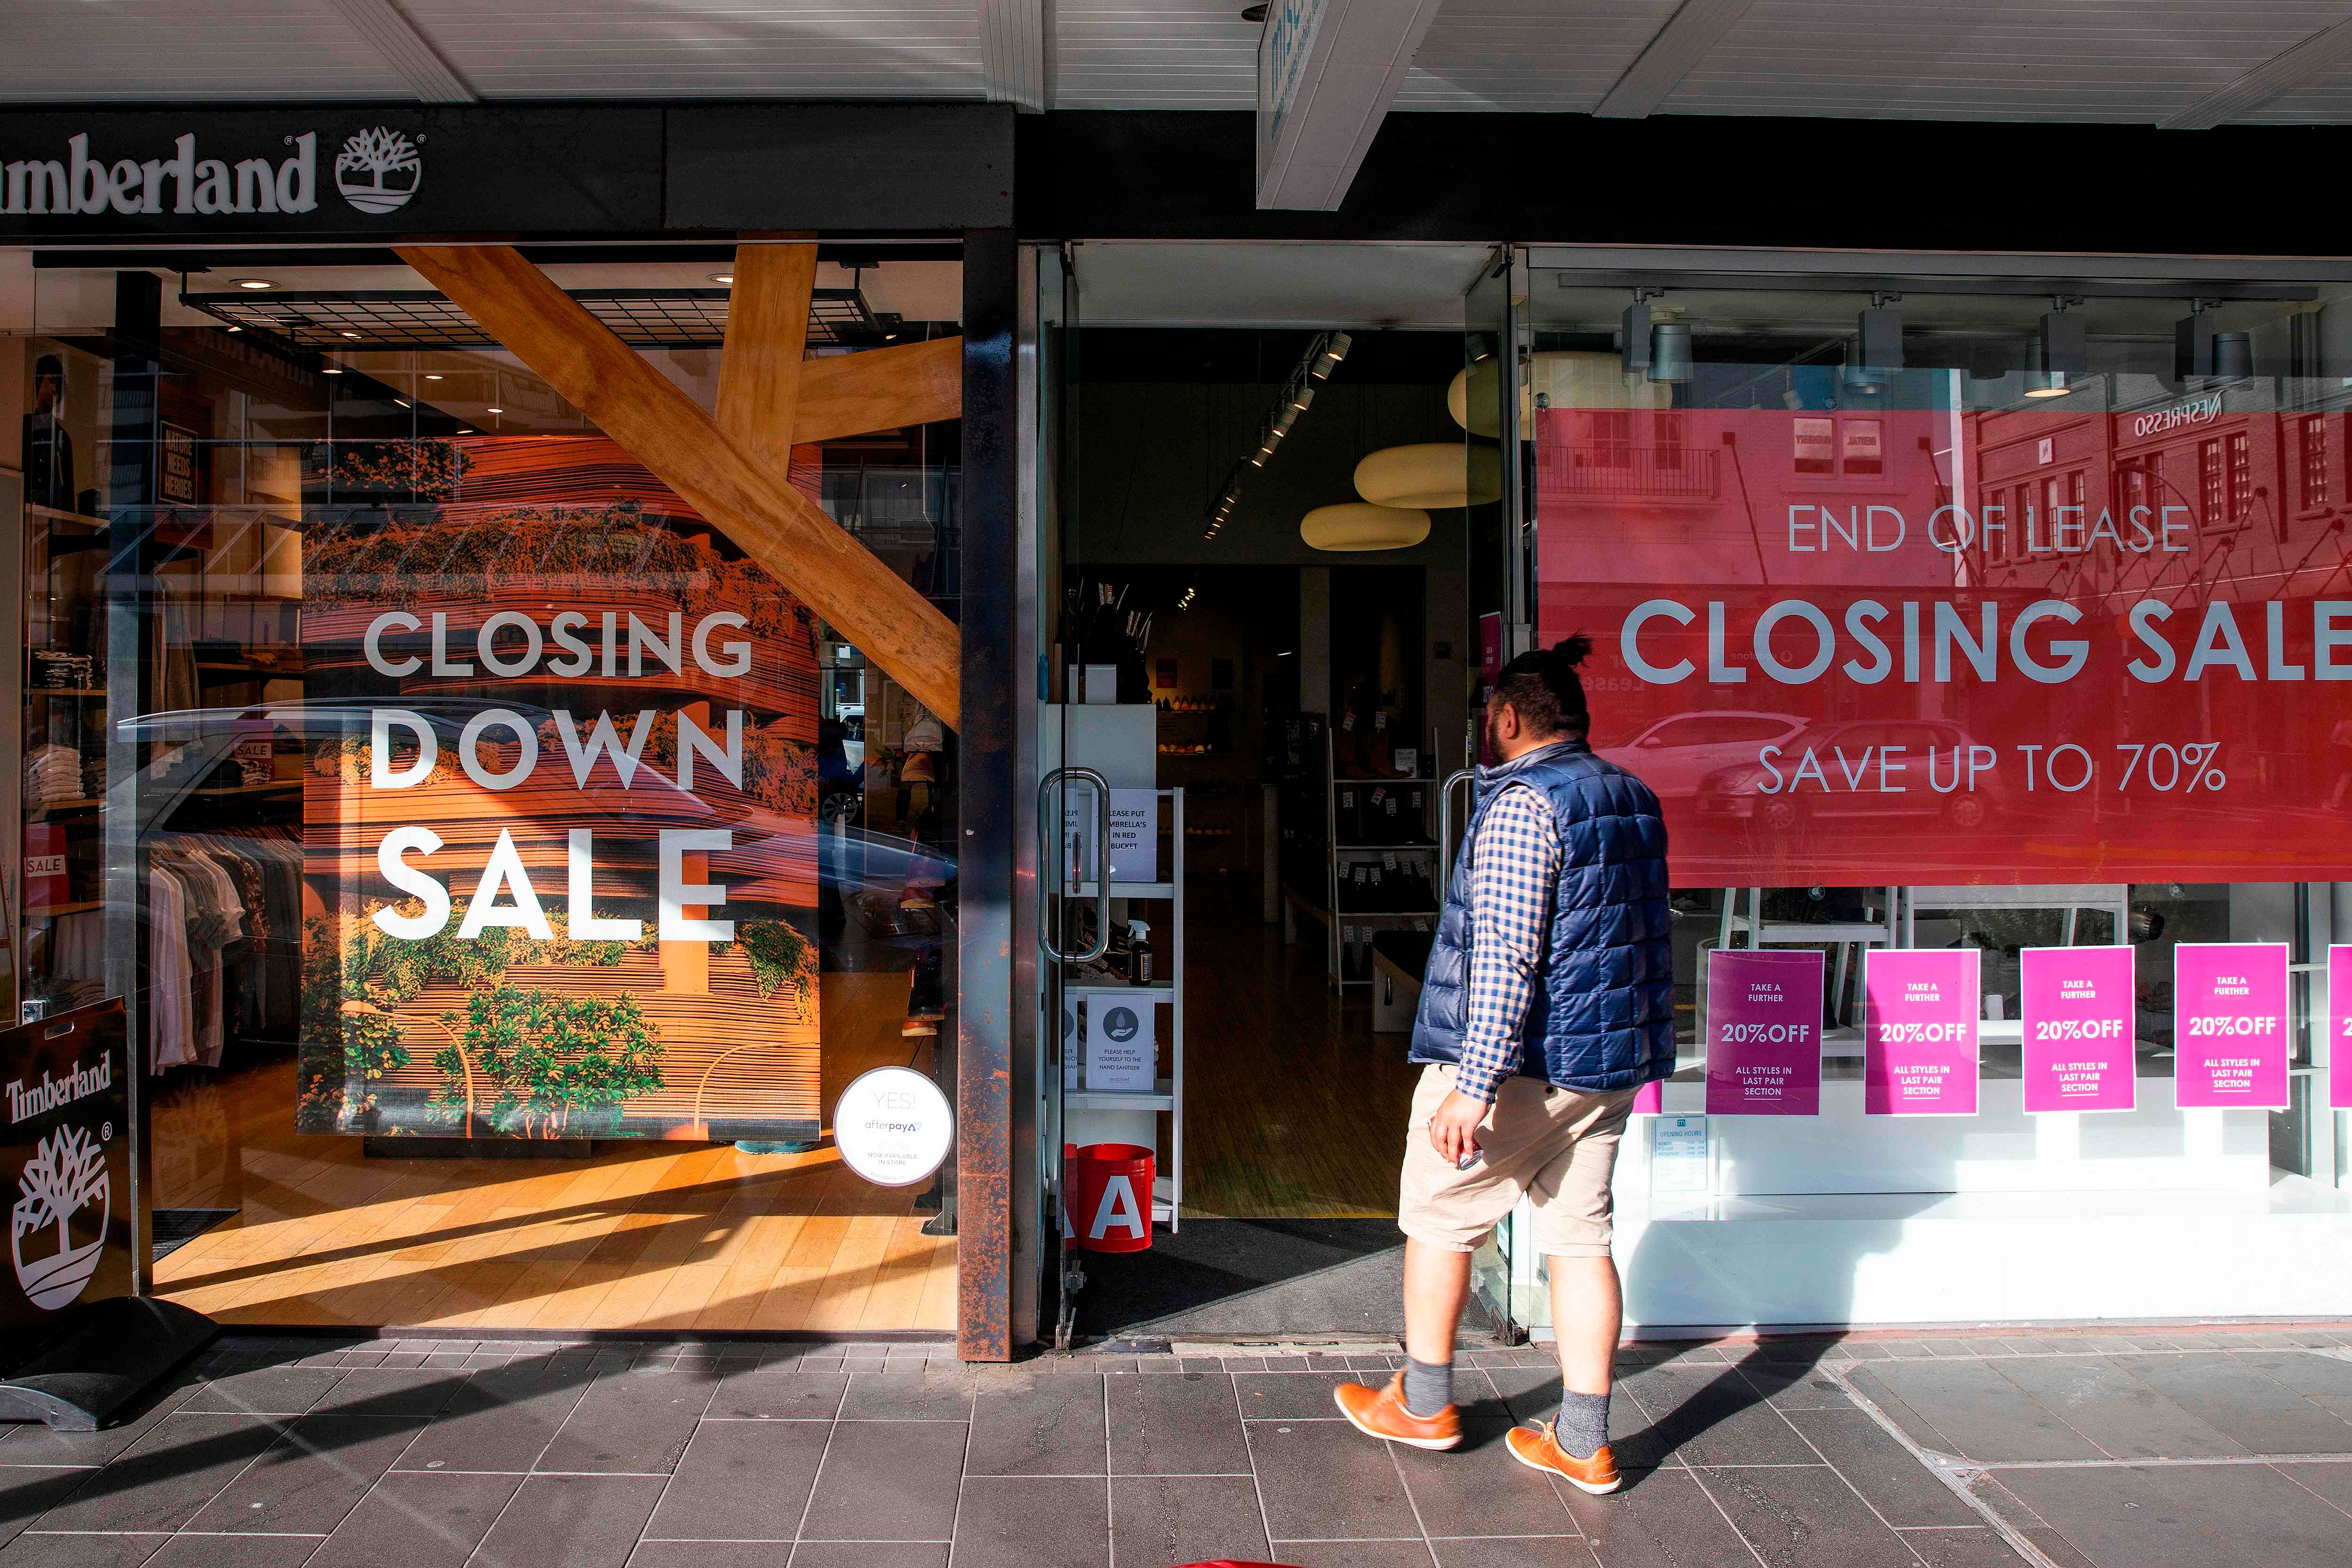 A shopper makes his way into a store offering a closing down sale in Auckland. Credits: PTI Photo